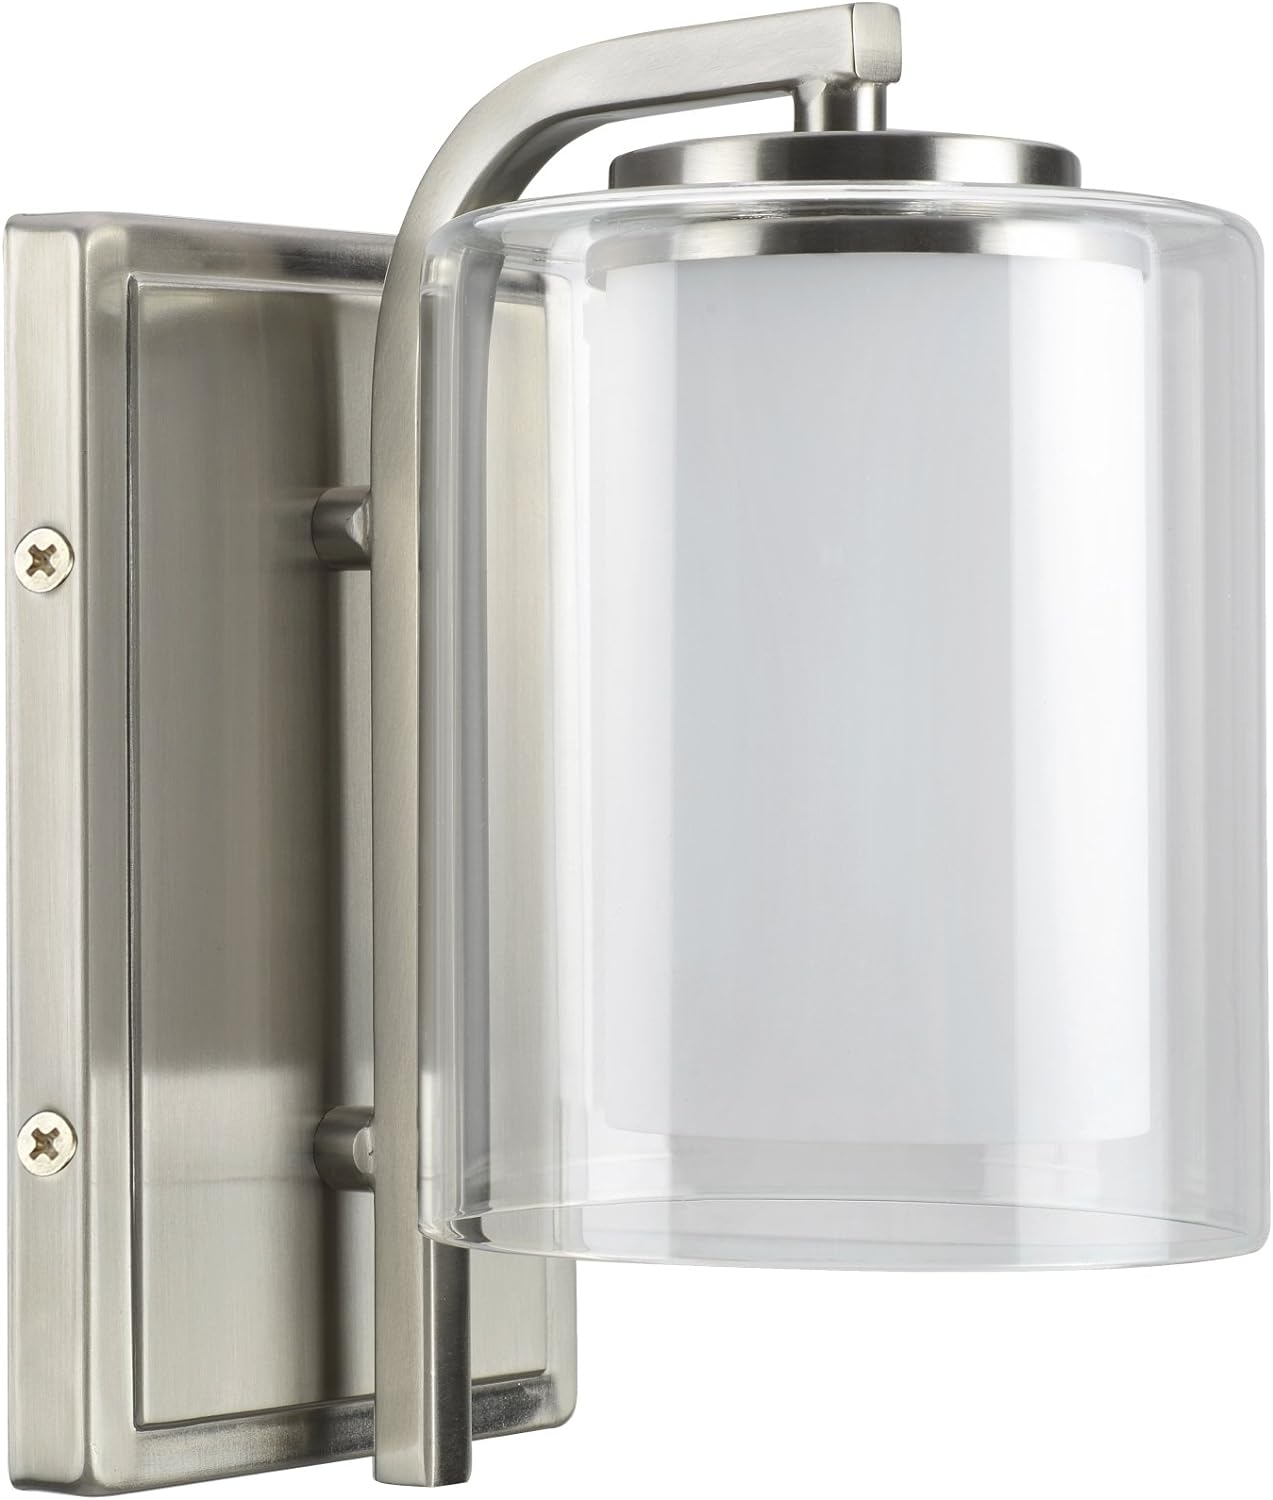 Aspen Creative 62101, One-Light Metal Bathroom Vanity Wall Light Fixture, 5 1/2" Wide, Transitional Design in Satin Nickel with Clear Glass Shade